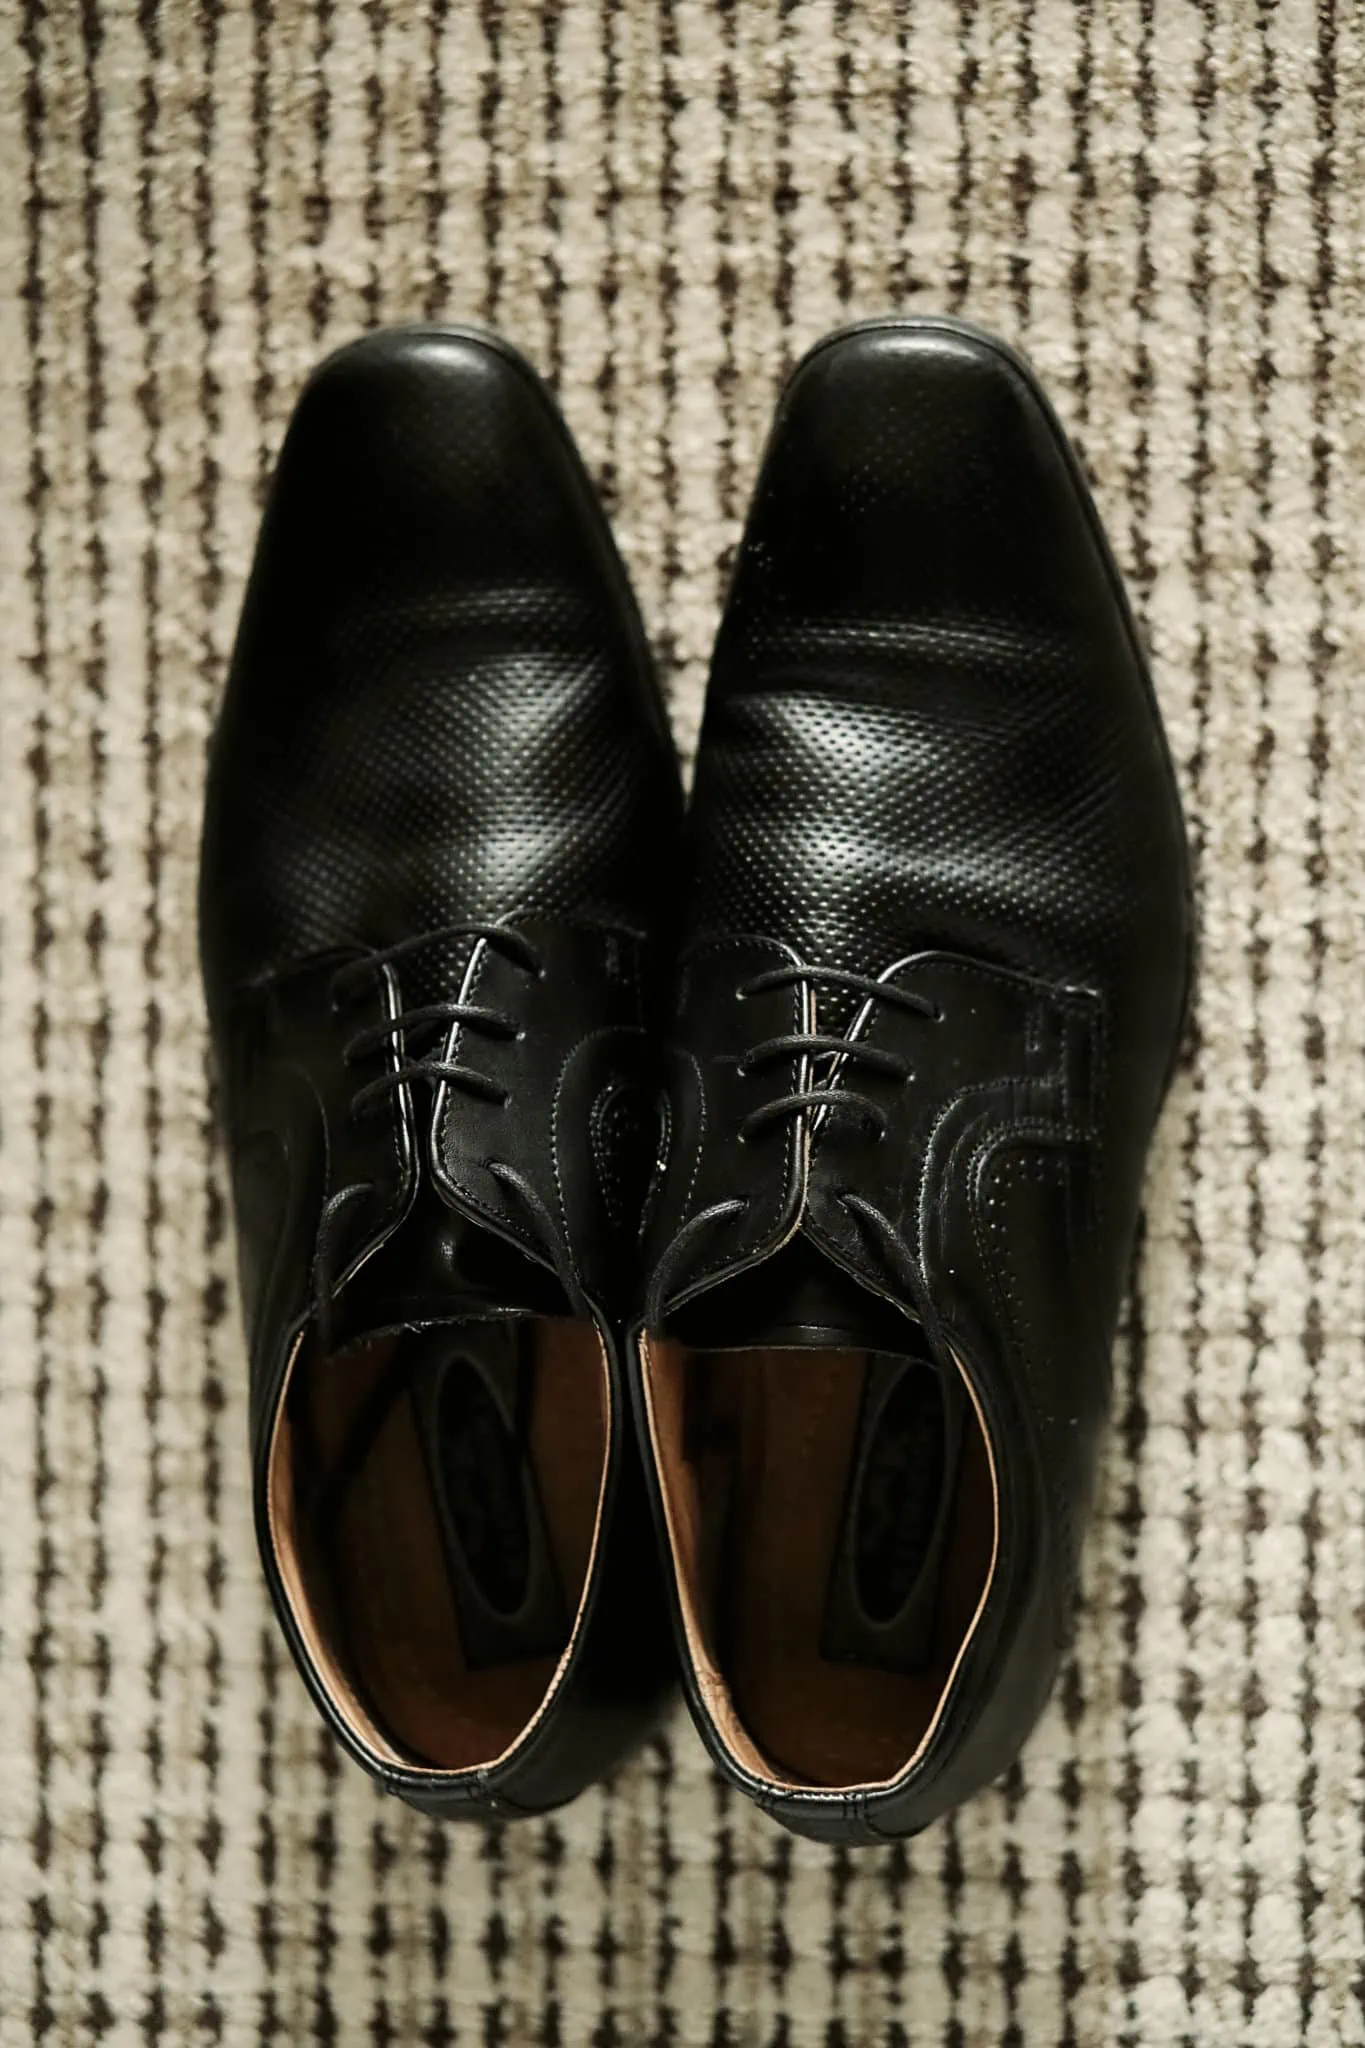 A pair of black shoes on a carpet at Michelle and Vedran's Rees Valley Station Elopement Wedding.